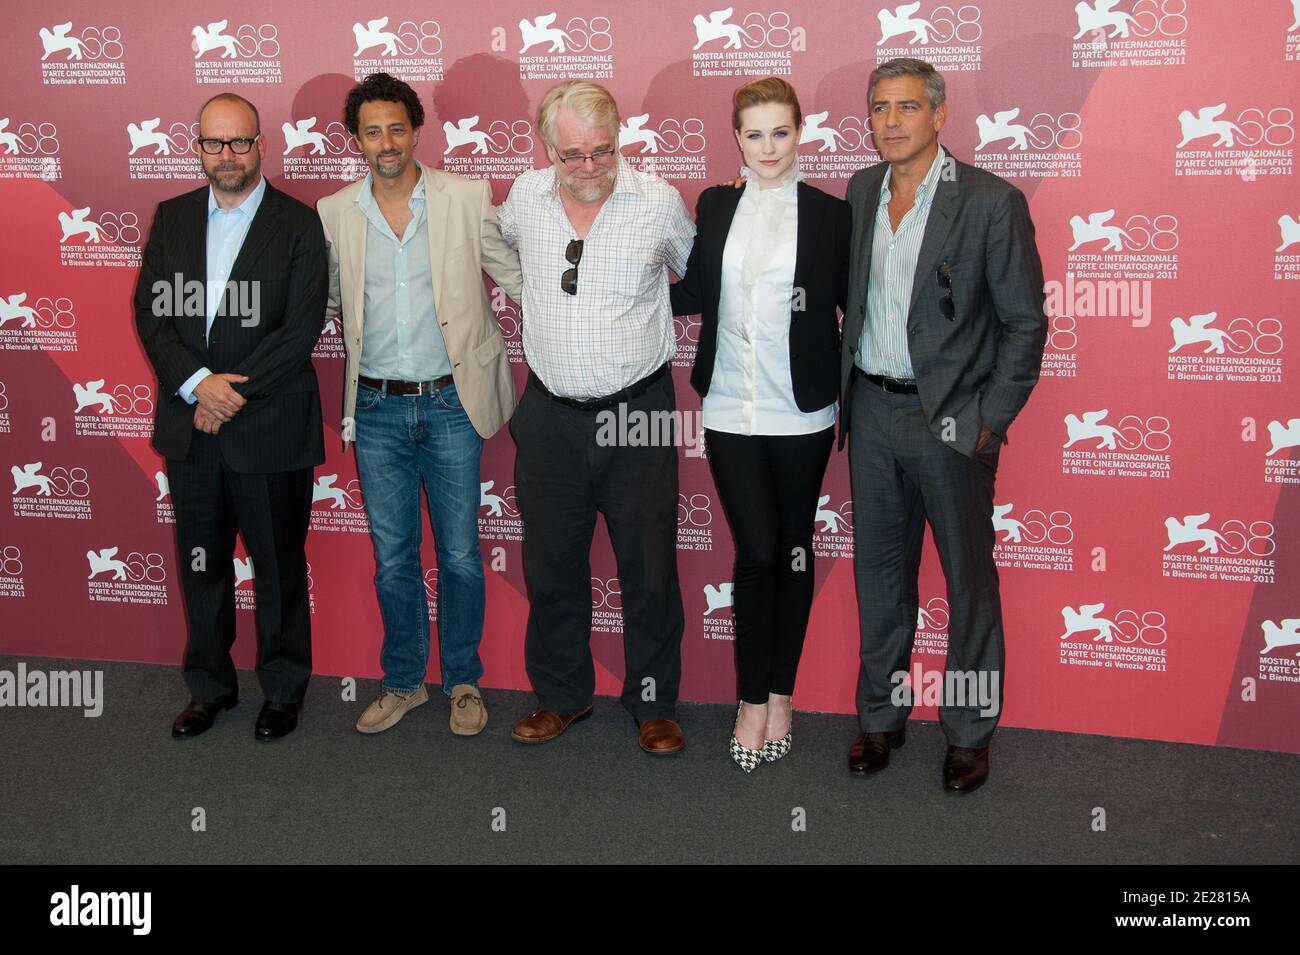 (L-R) Paul Giamatti, Grant Heslov, Philip Seymour Hoffman, Evan Rachel Wood and director and actor George Clooney attending the 'The Ides of March' Photocall during the 68th International Venice Film Festival Mostra held at the Casino in Venice, Italy on August 31, 2011. Photo by Nicolas Genin/ABACAPRESS.COM Stock Photo